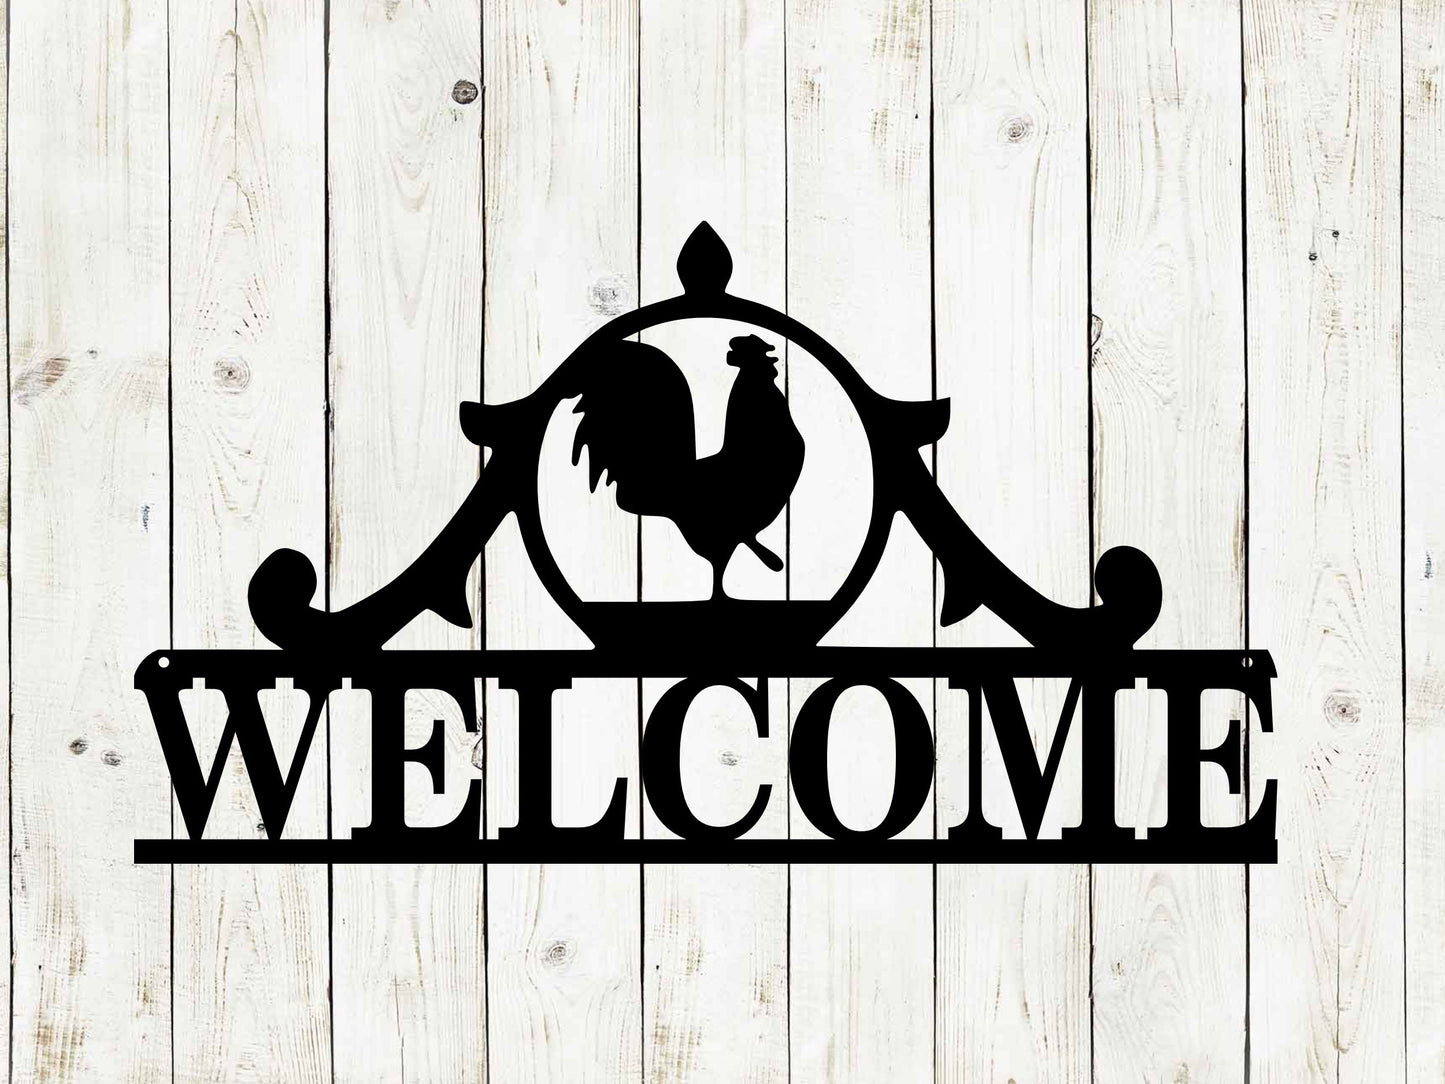 Welcome Rooster Metal Sign, Metal Wall Art, Metal Signs, Home Decor, Farmhouse Decor, Gift Ideas, Custom